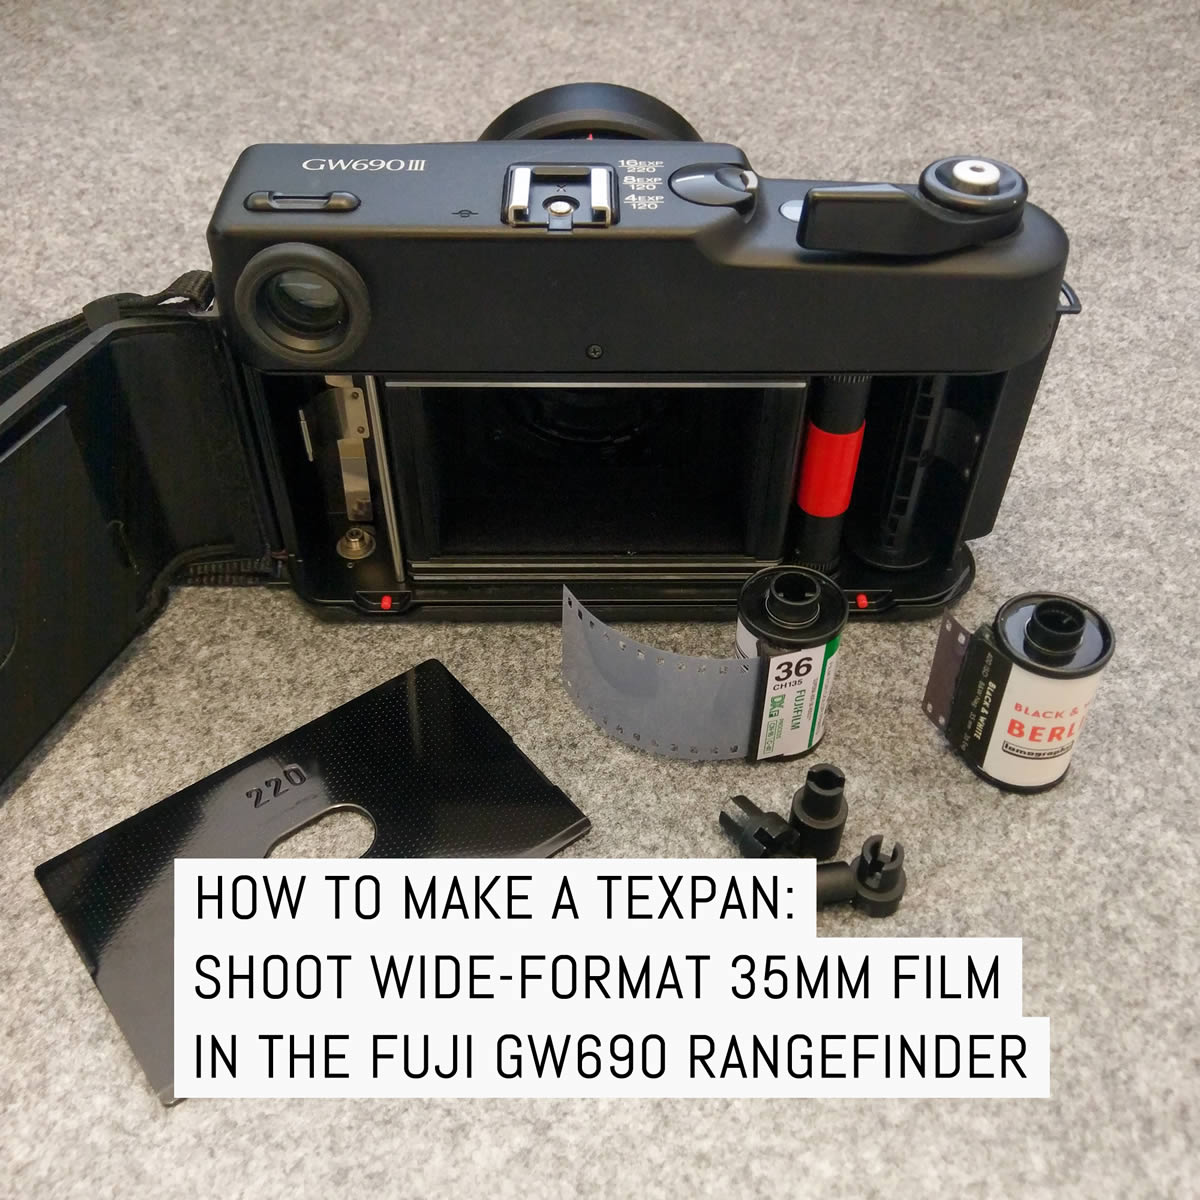 Cover - How to make a TEXPan, aka shoot wide-format 35mm film in the Fuji GW690 rangefinder